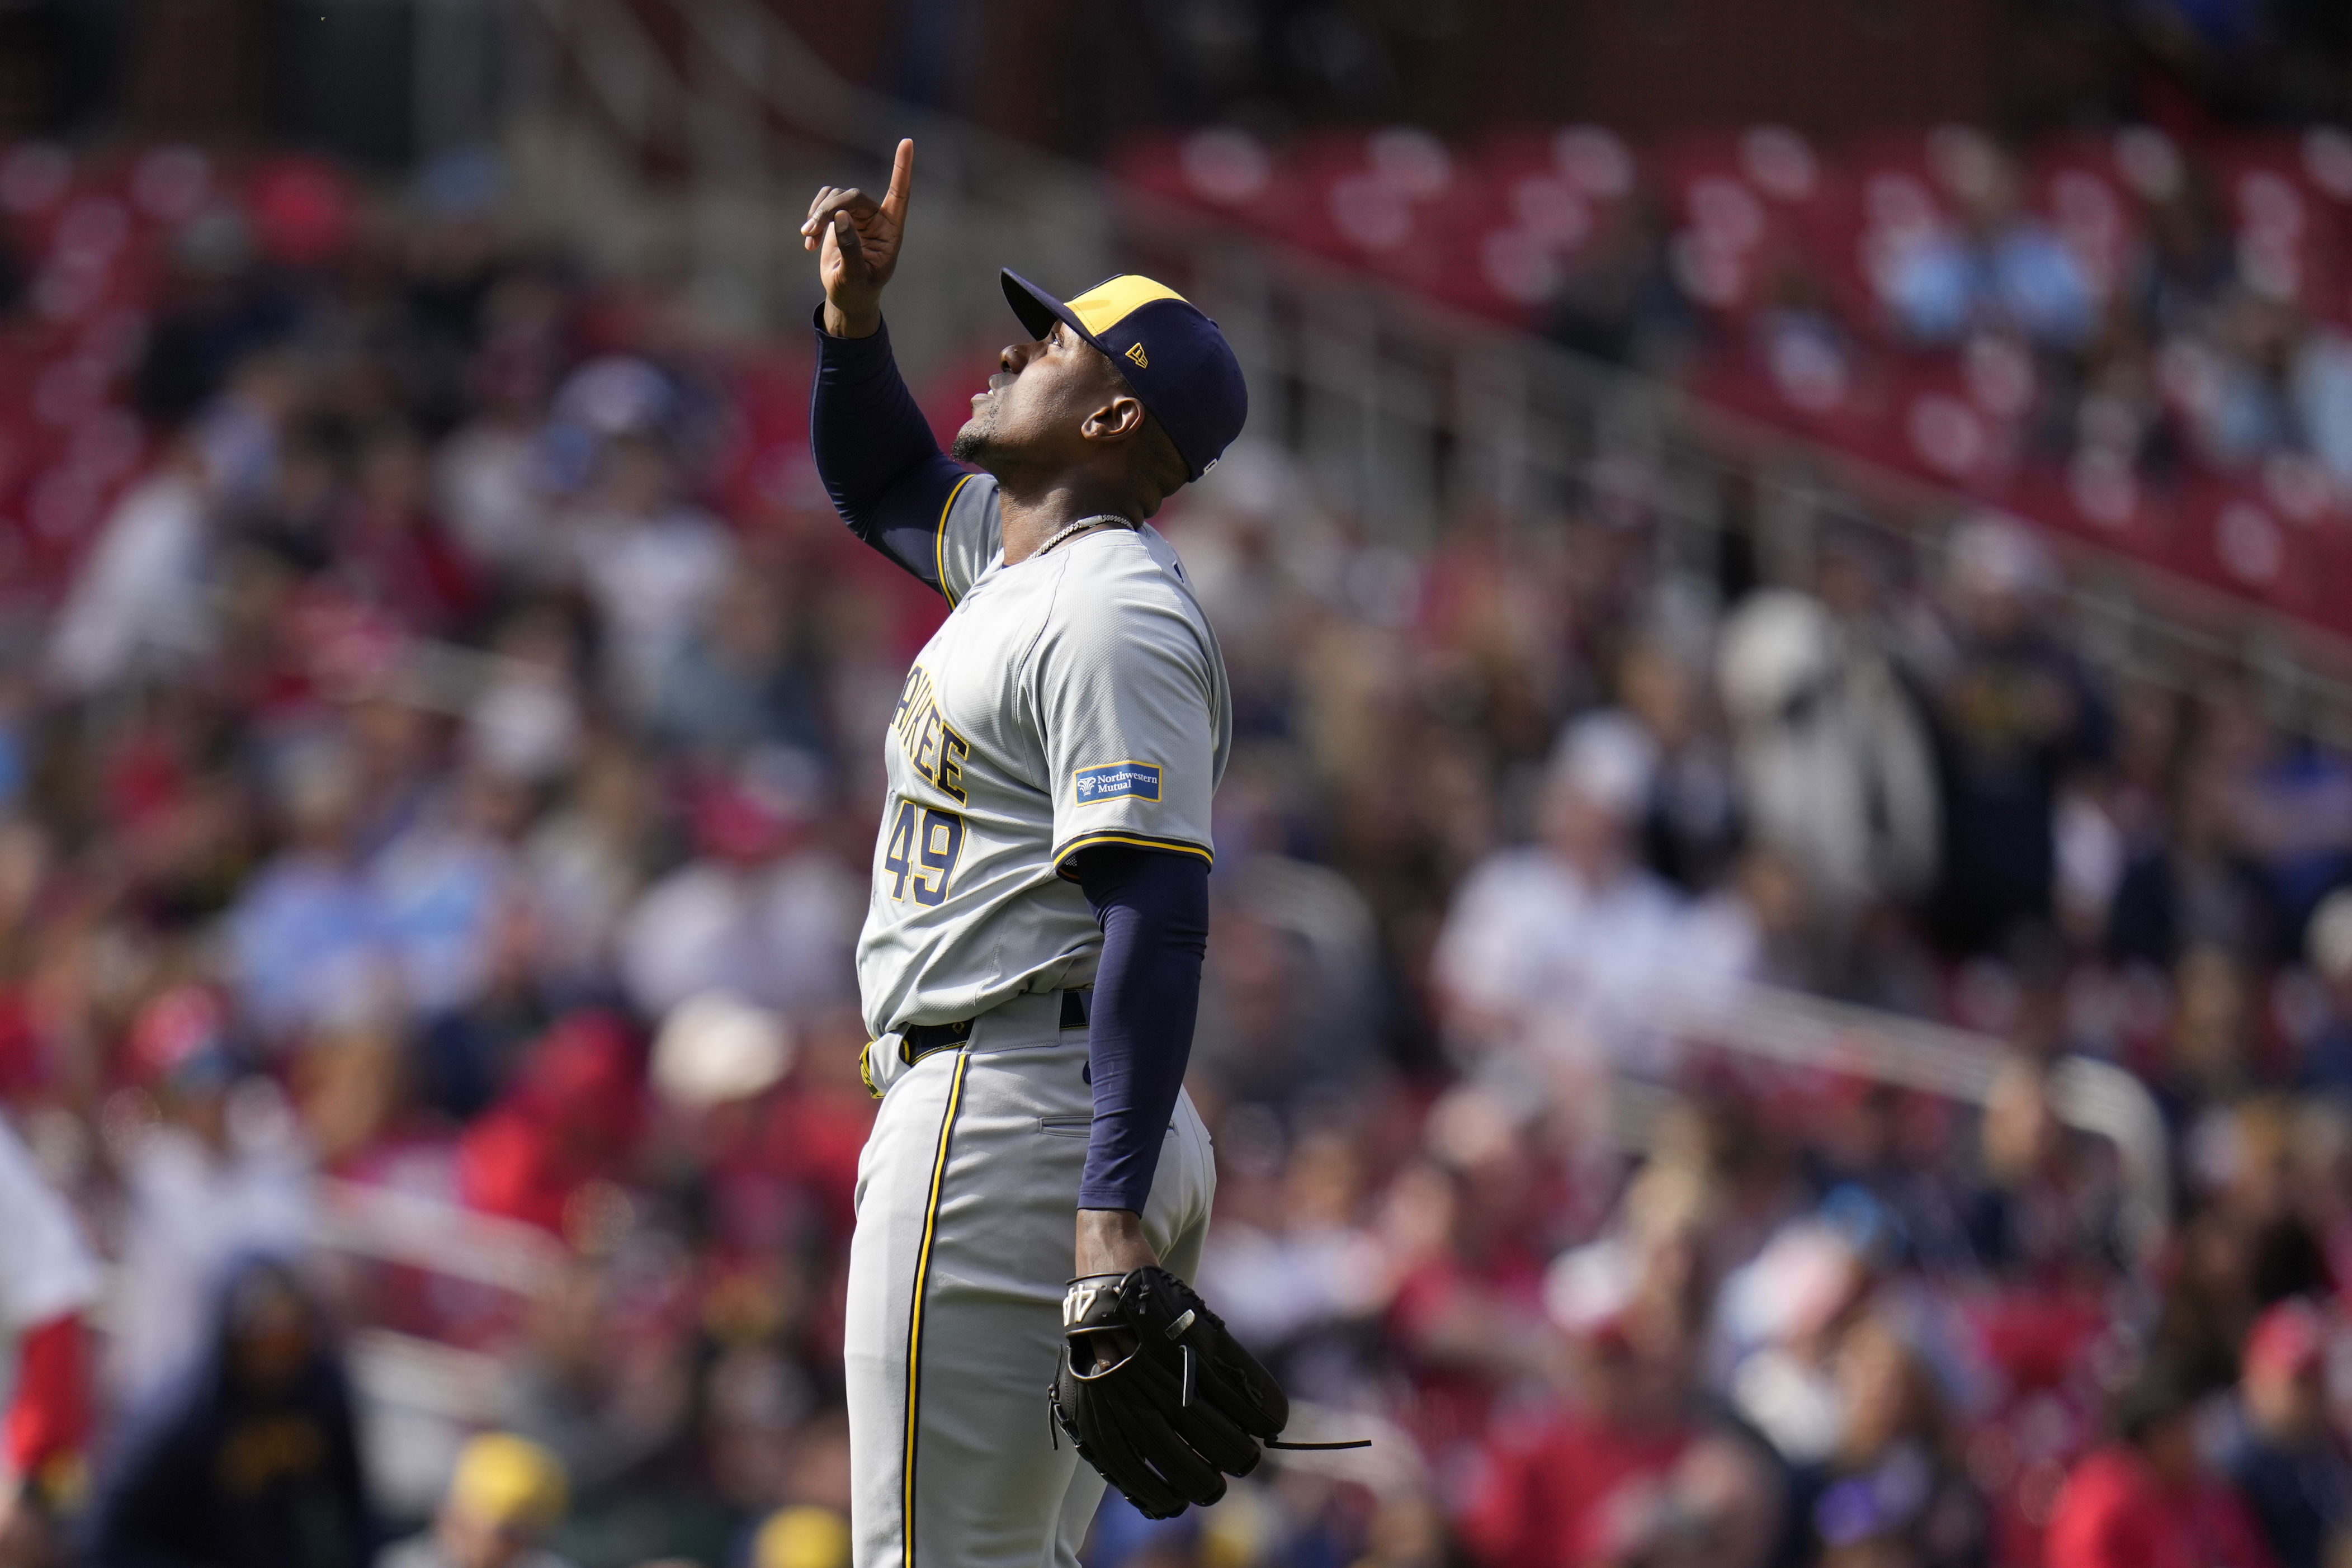 brice turang and jackson chourio hit back-to-back homers as brewers beat cardinals 12-5